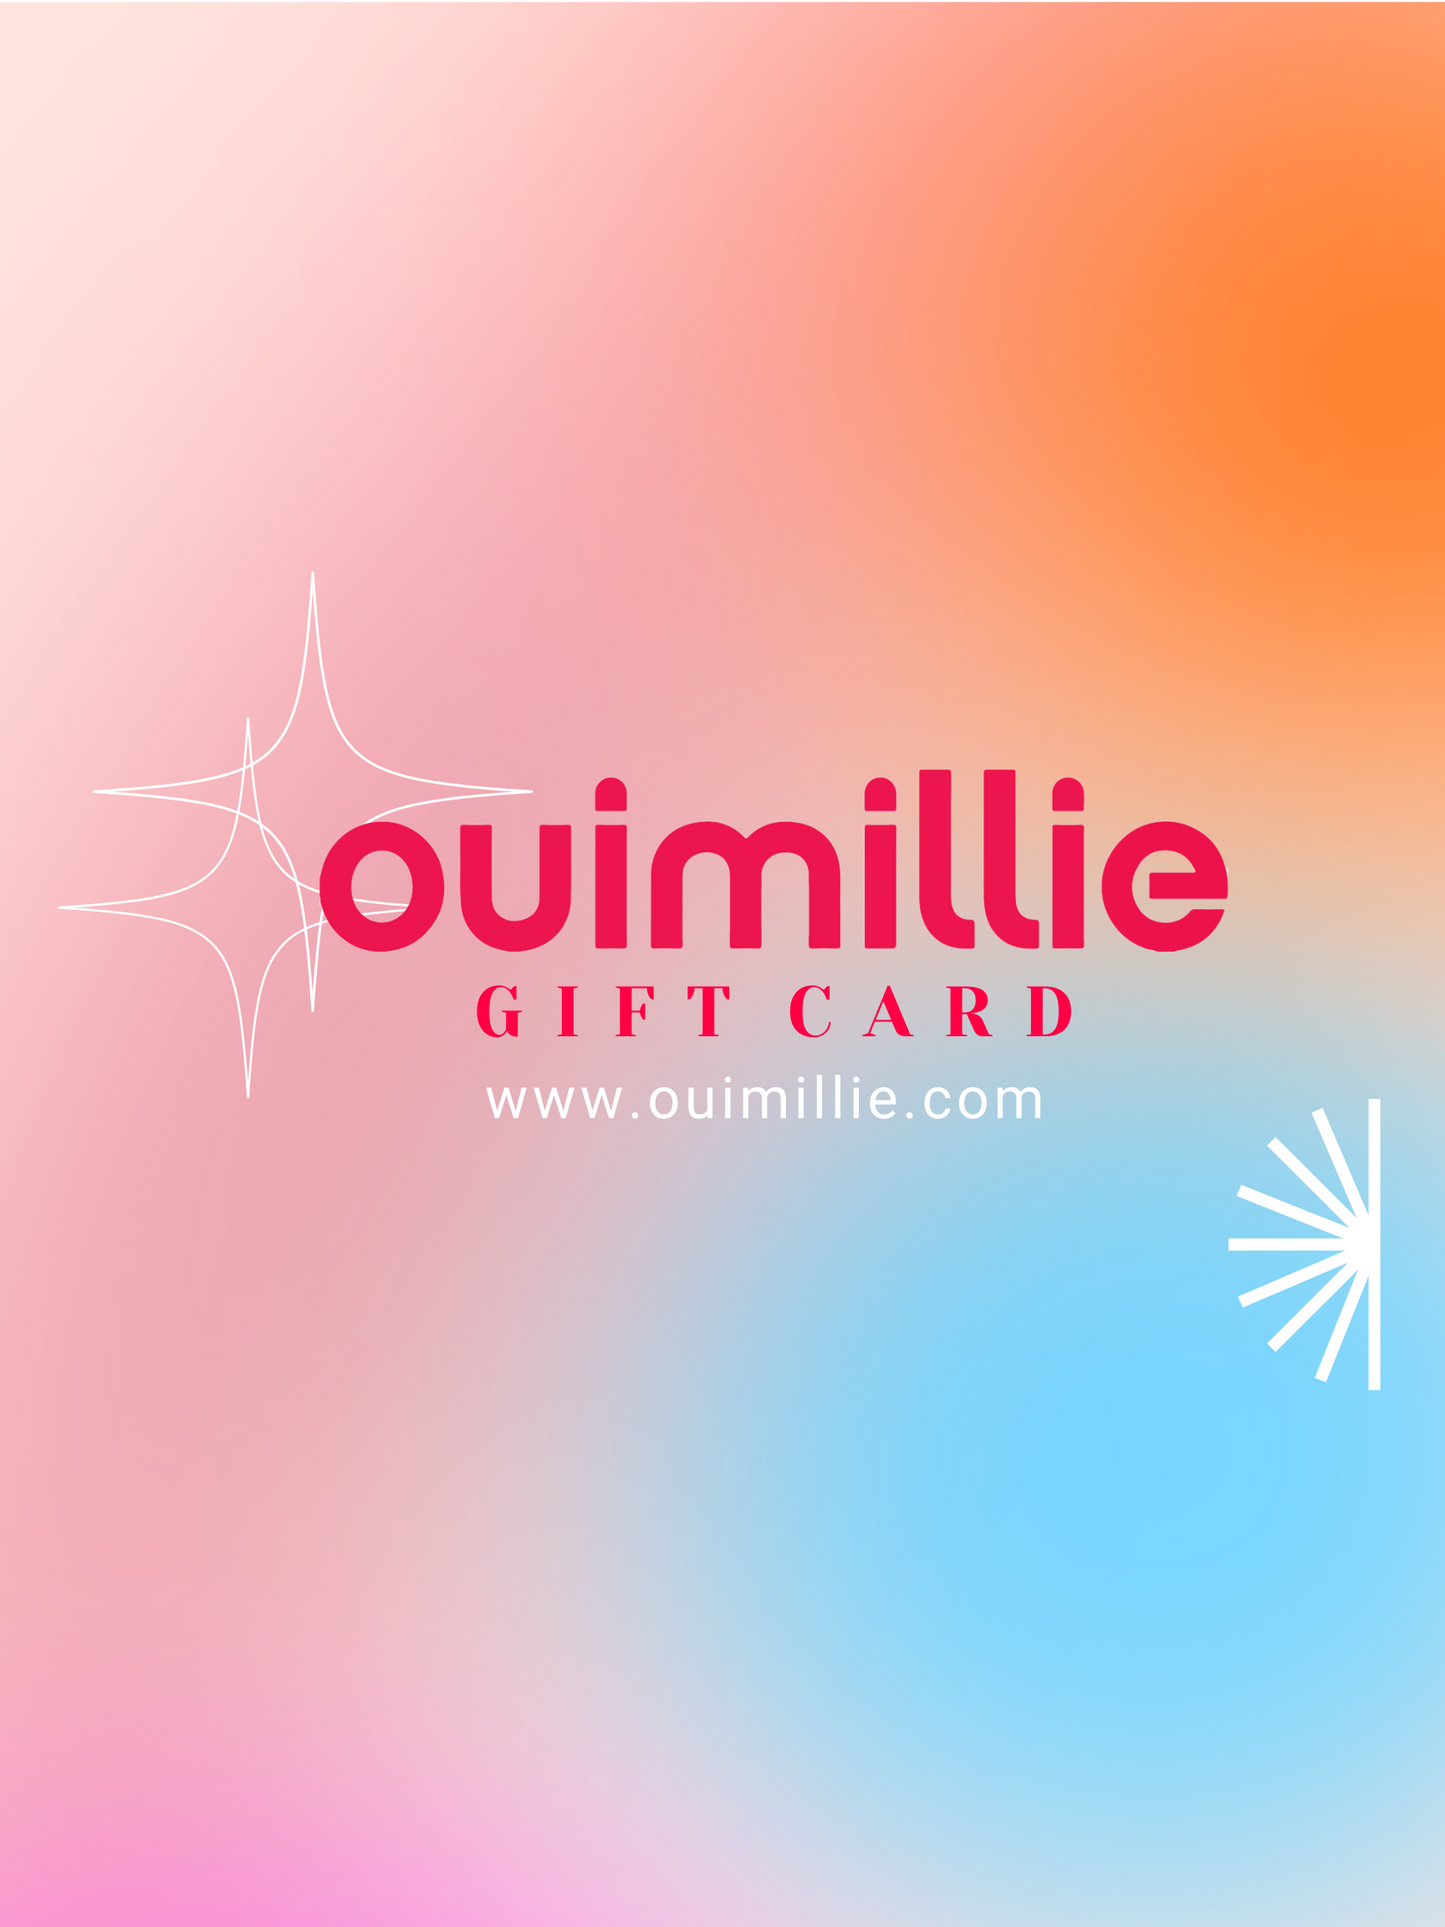 Ouimillie Gift Card